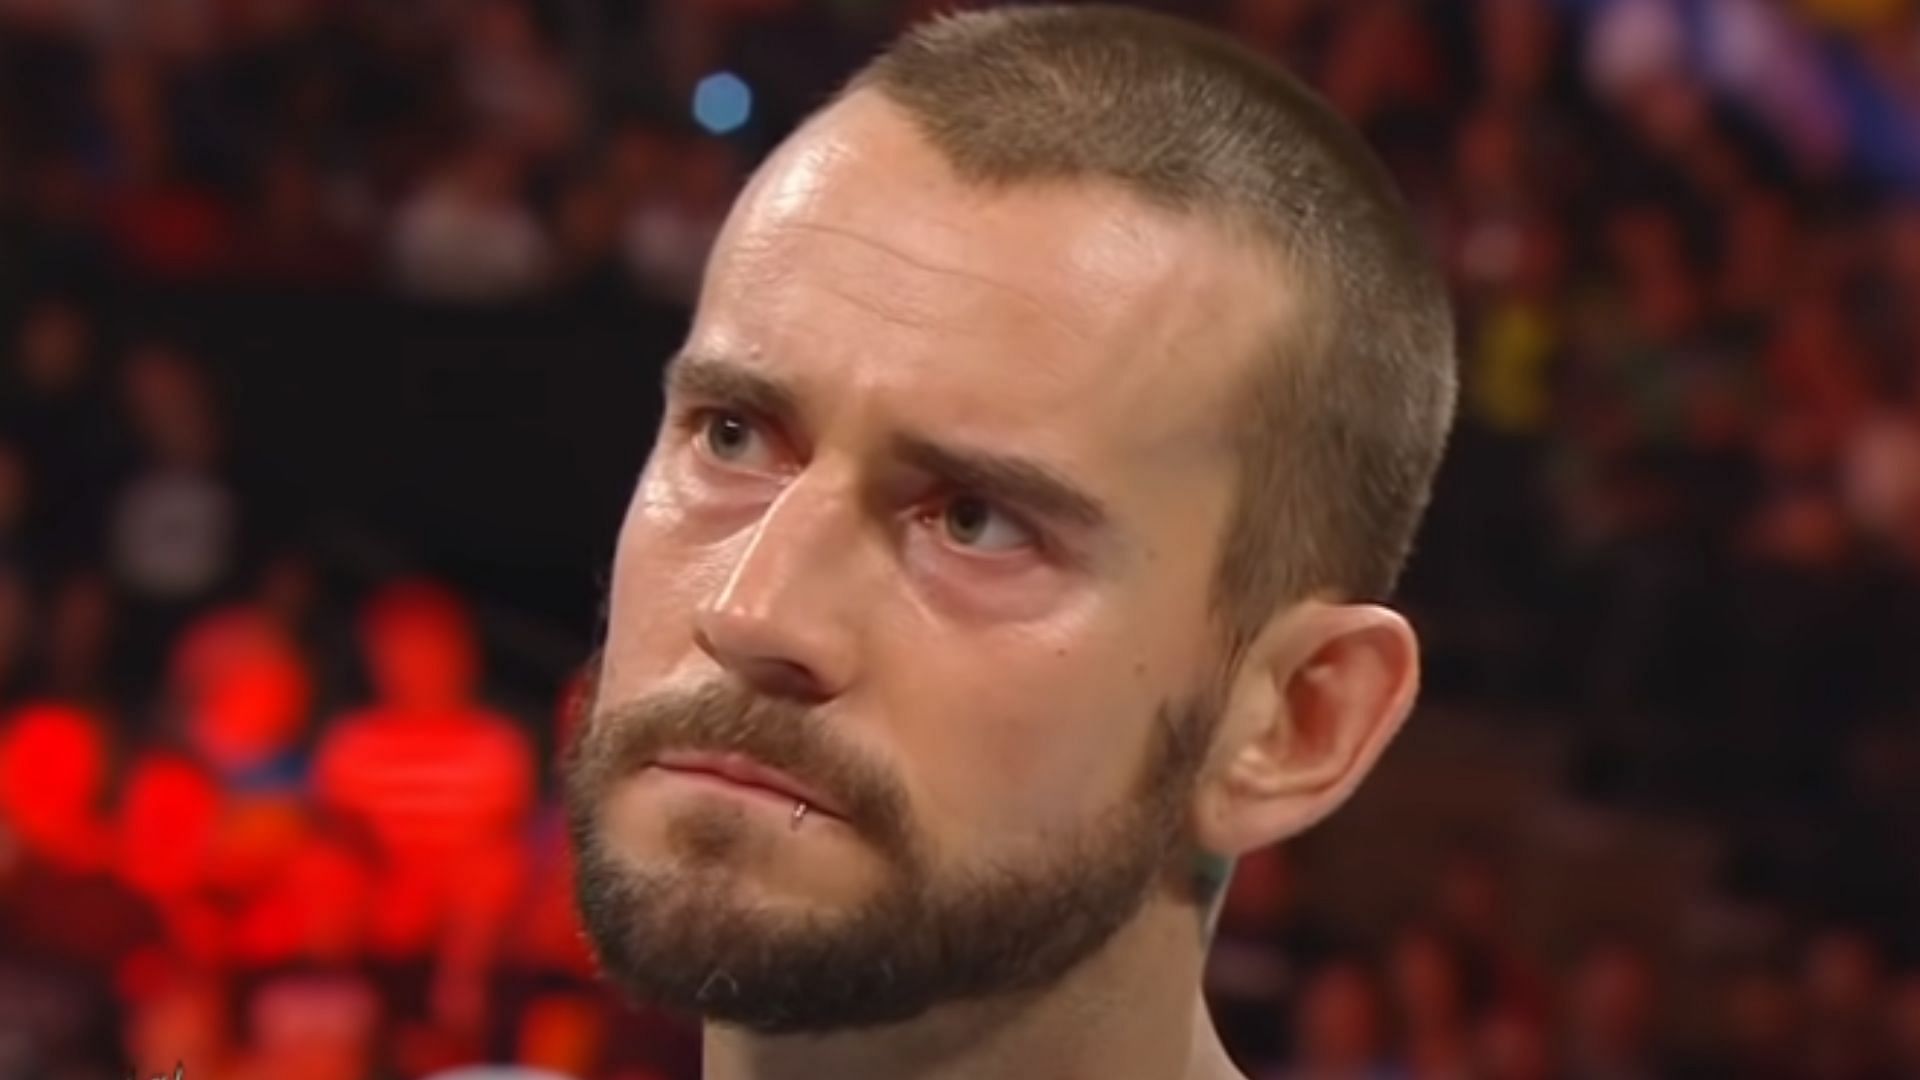 CM Punk briefly worked on the same roster as Rene Dupree